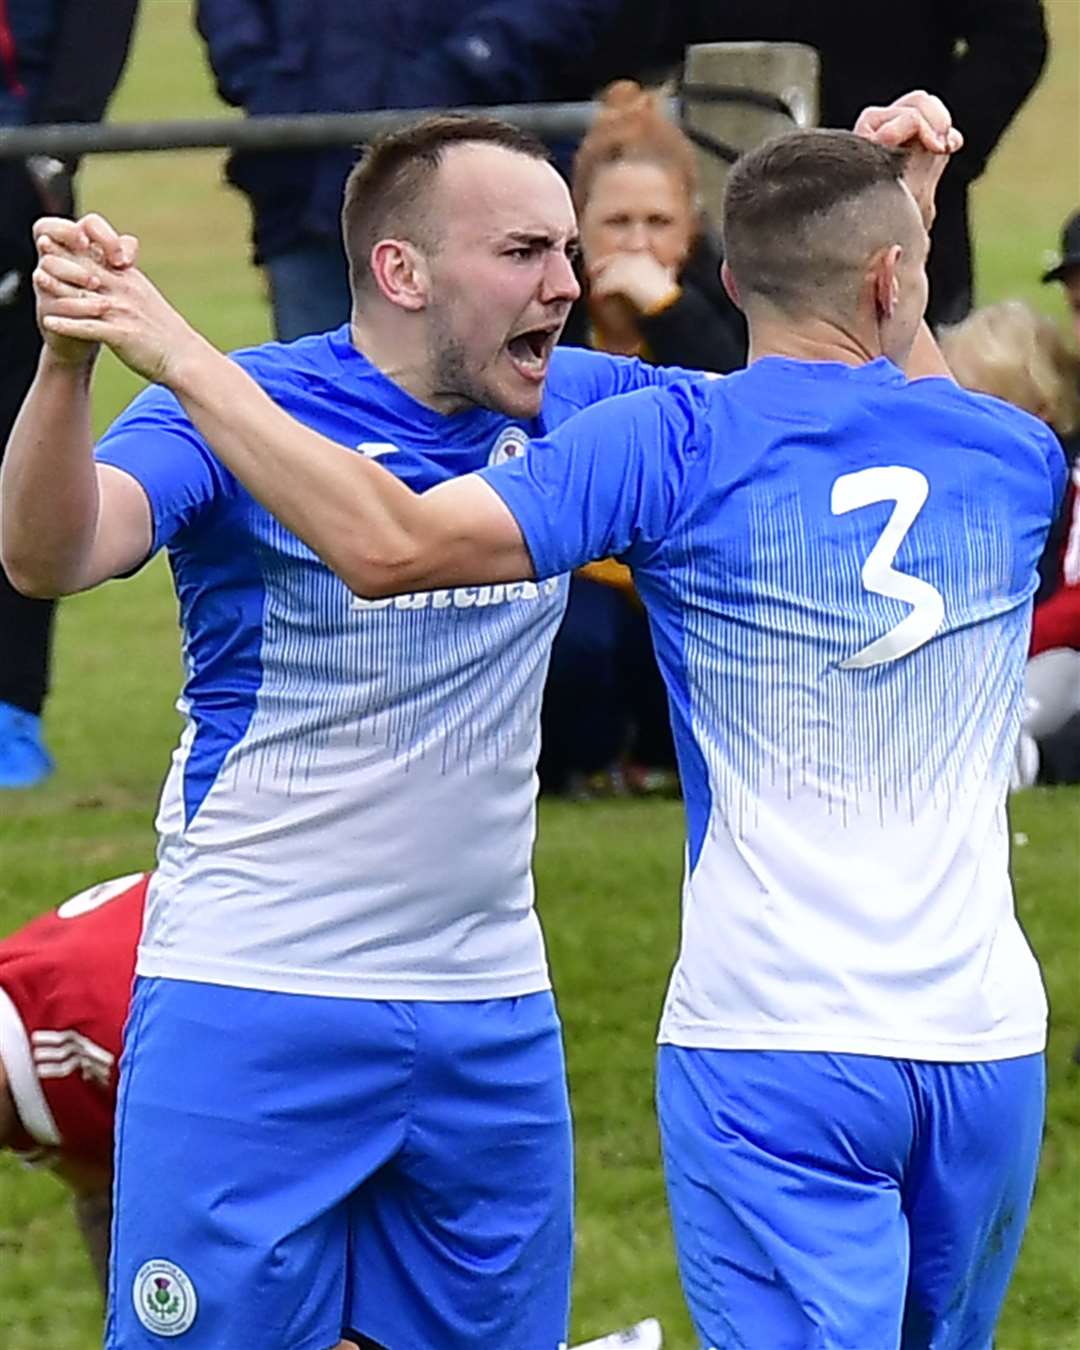 Goalscorer Owen Harrold (left) with his brother Lewis after equalising for Thistle. Picture: Mel Roger